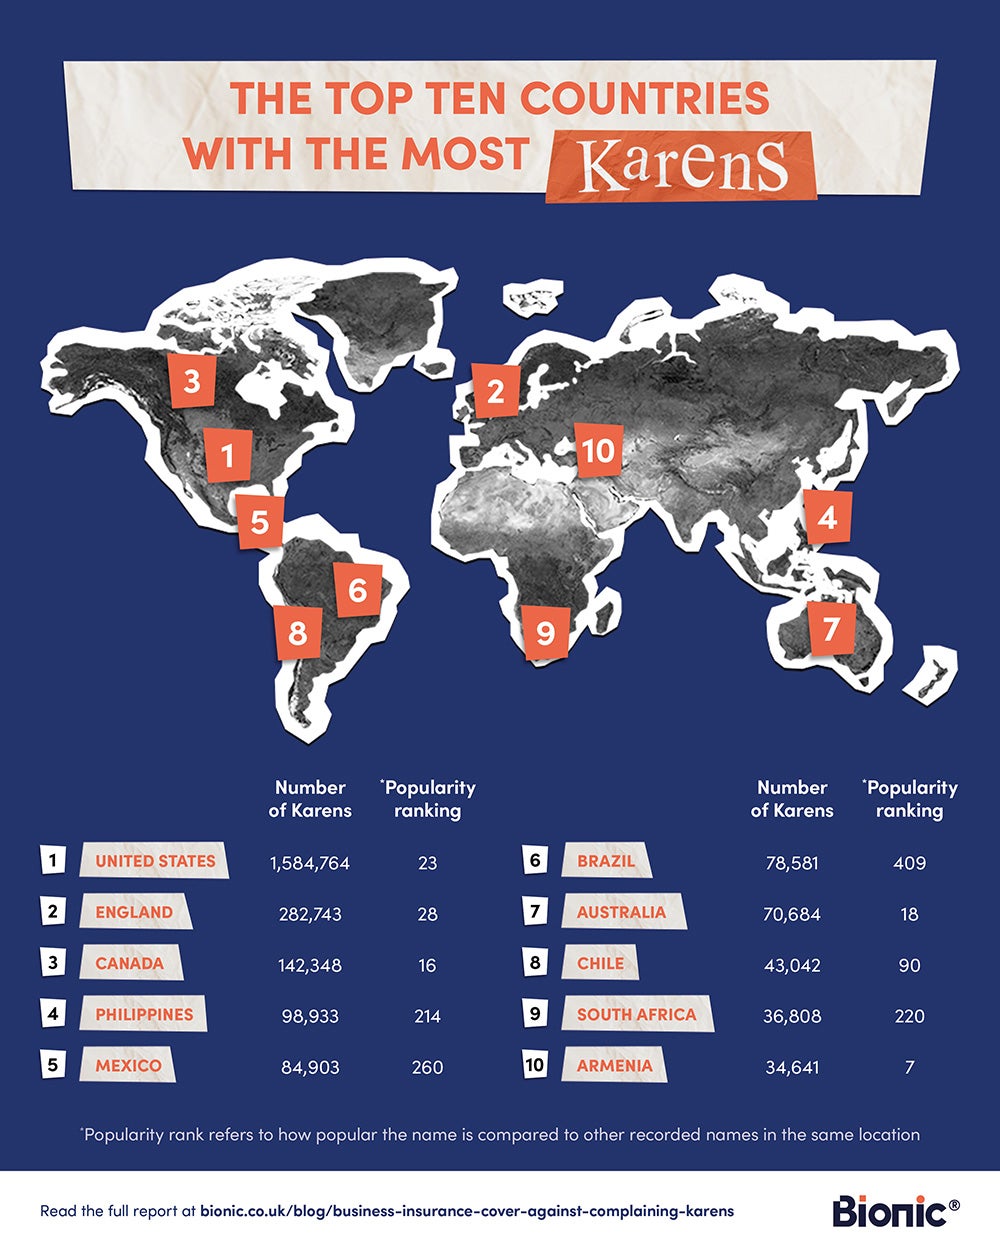 Map of the world showing the countries with the most number of Karens who complain